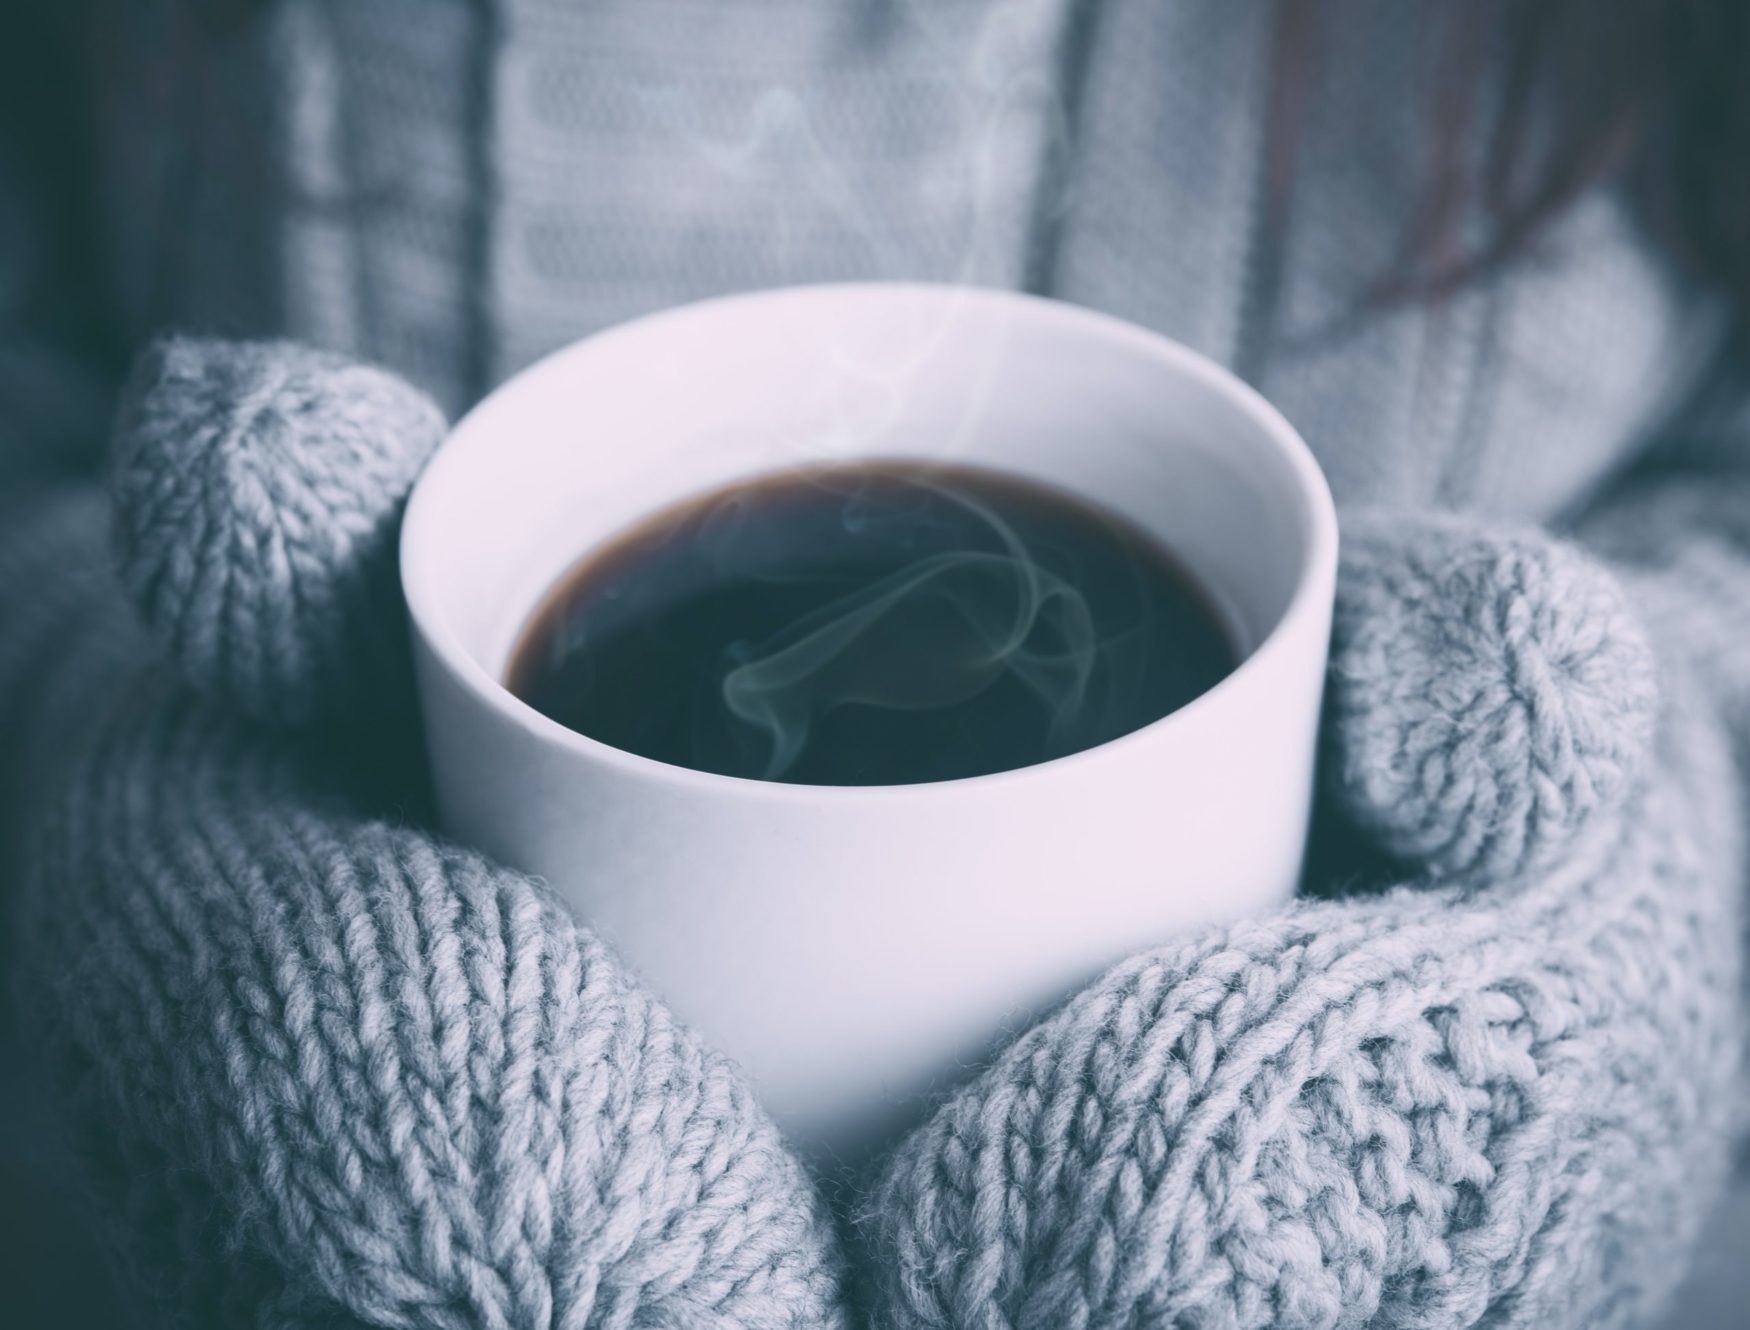 Two gray hands in gray mittens hold a white mug with a steamy dark liquid inside.